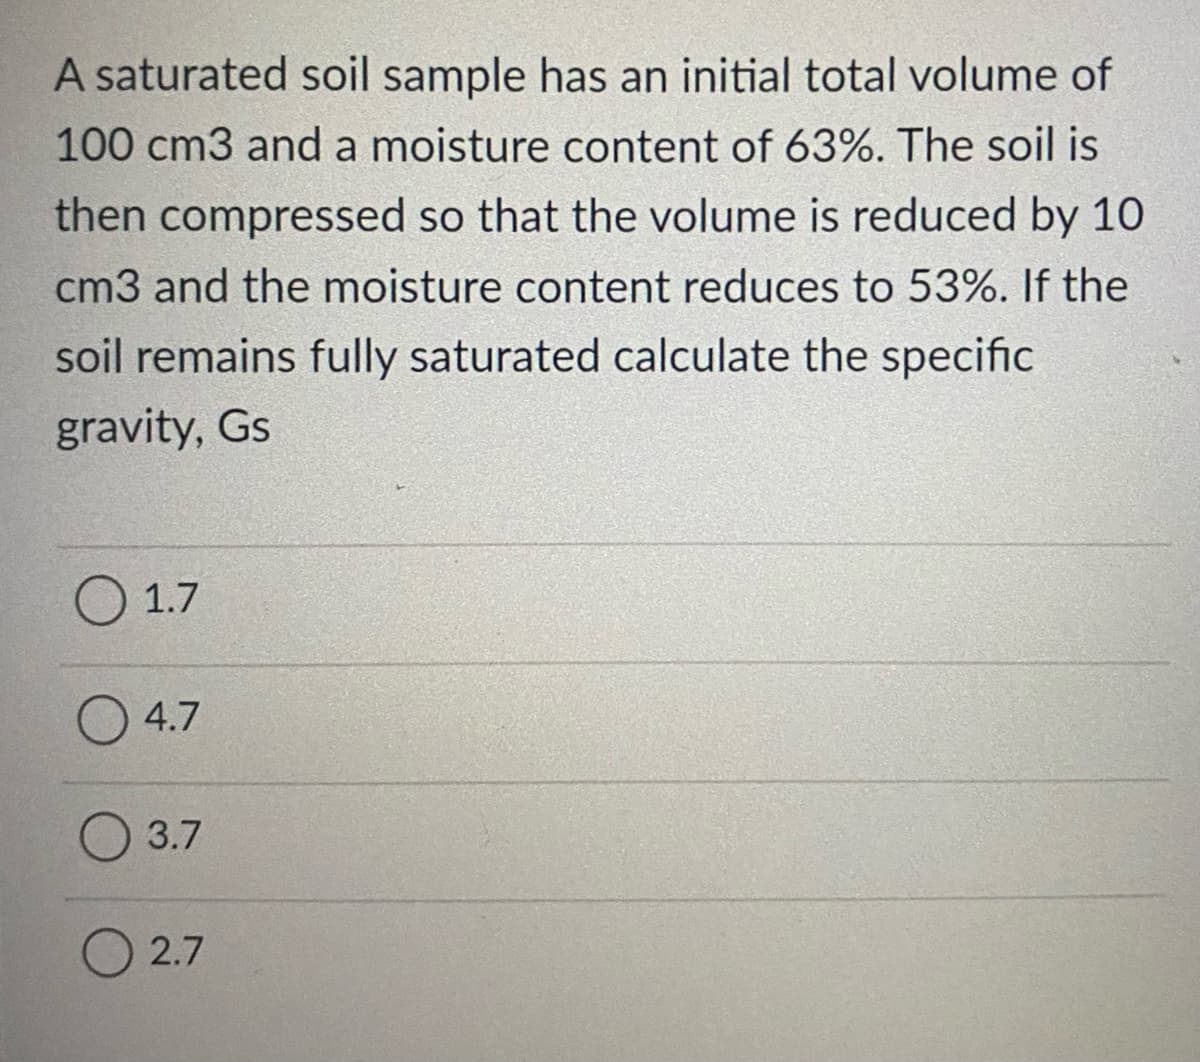 A saturated soil sample has an initial total volume of
100 cm3 and a moisture content of 63%. The soil is
then compressed so that the volume is reduced by 10
cm3 and the moisture content reduces to 53%. If the
soil remains fully saturated calculate the specific
gravity, Gs
O 1.7
4.7
3.7
O 2.7
